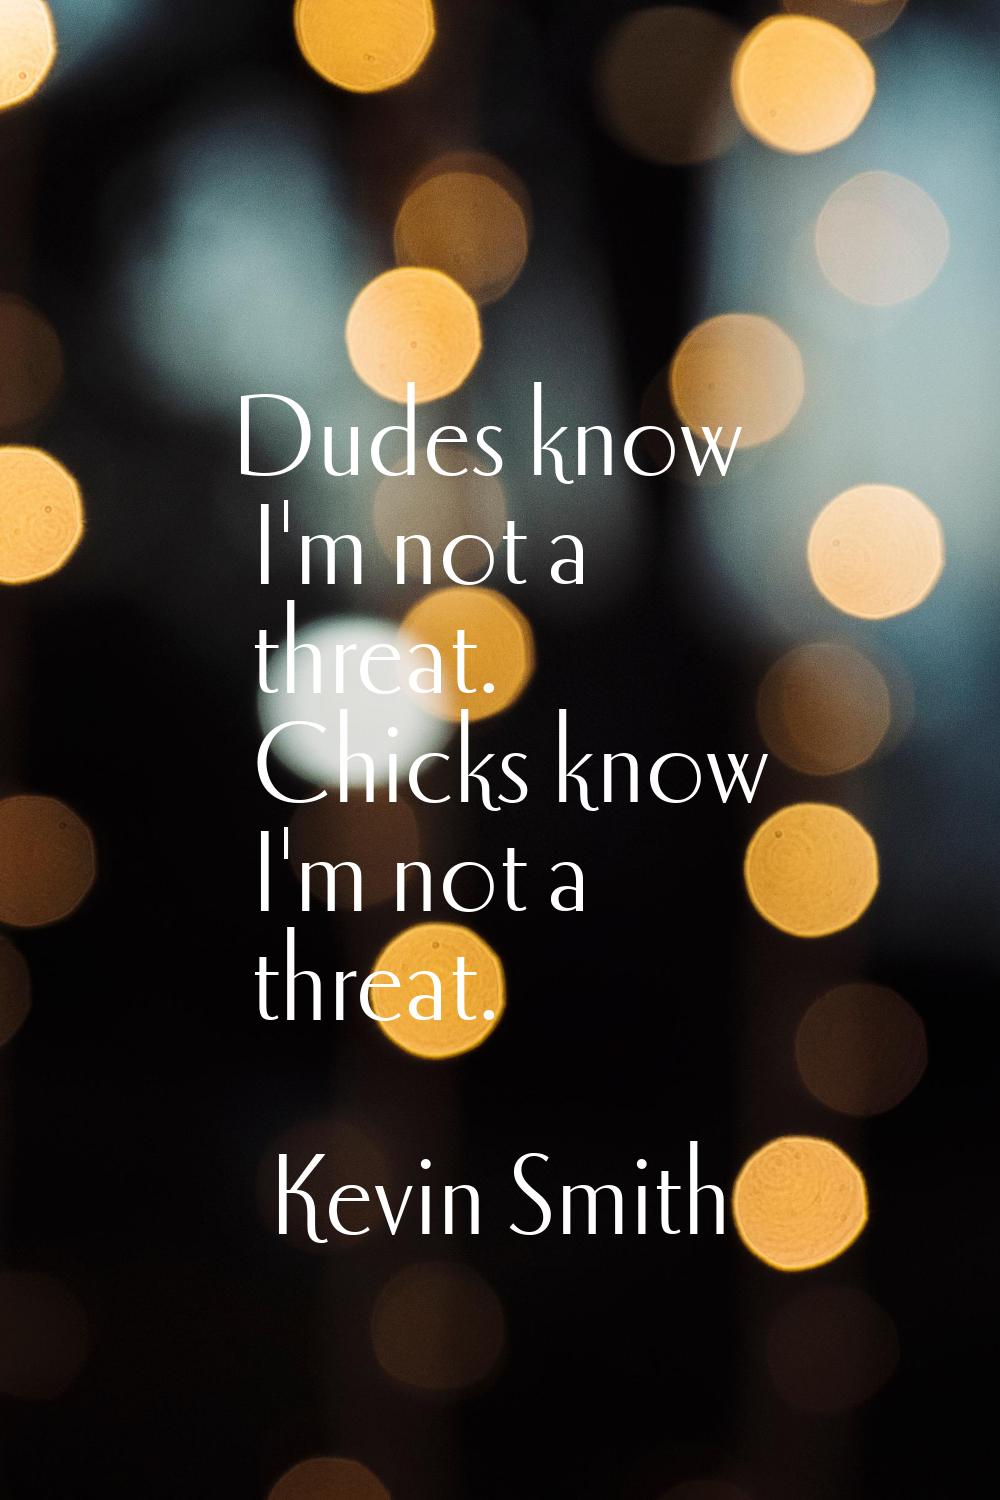 Dudes know I'm not a threat. Chicks know I'm not a threat.